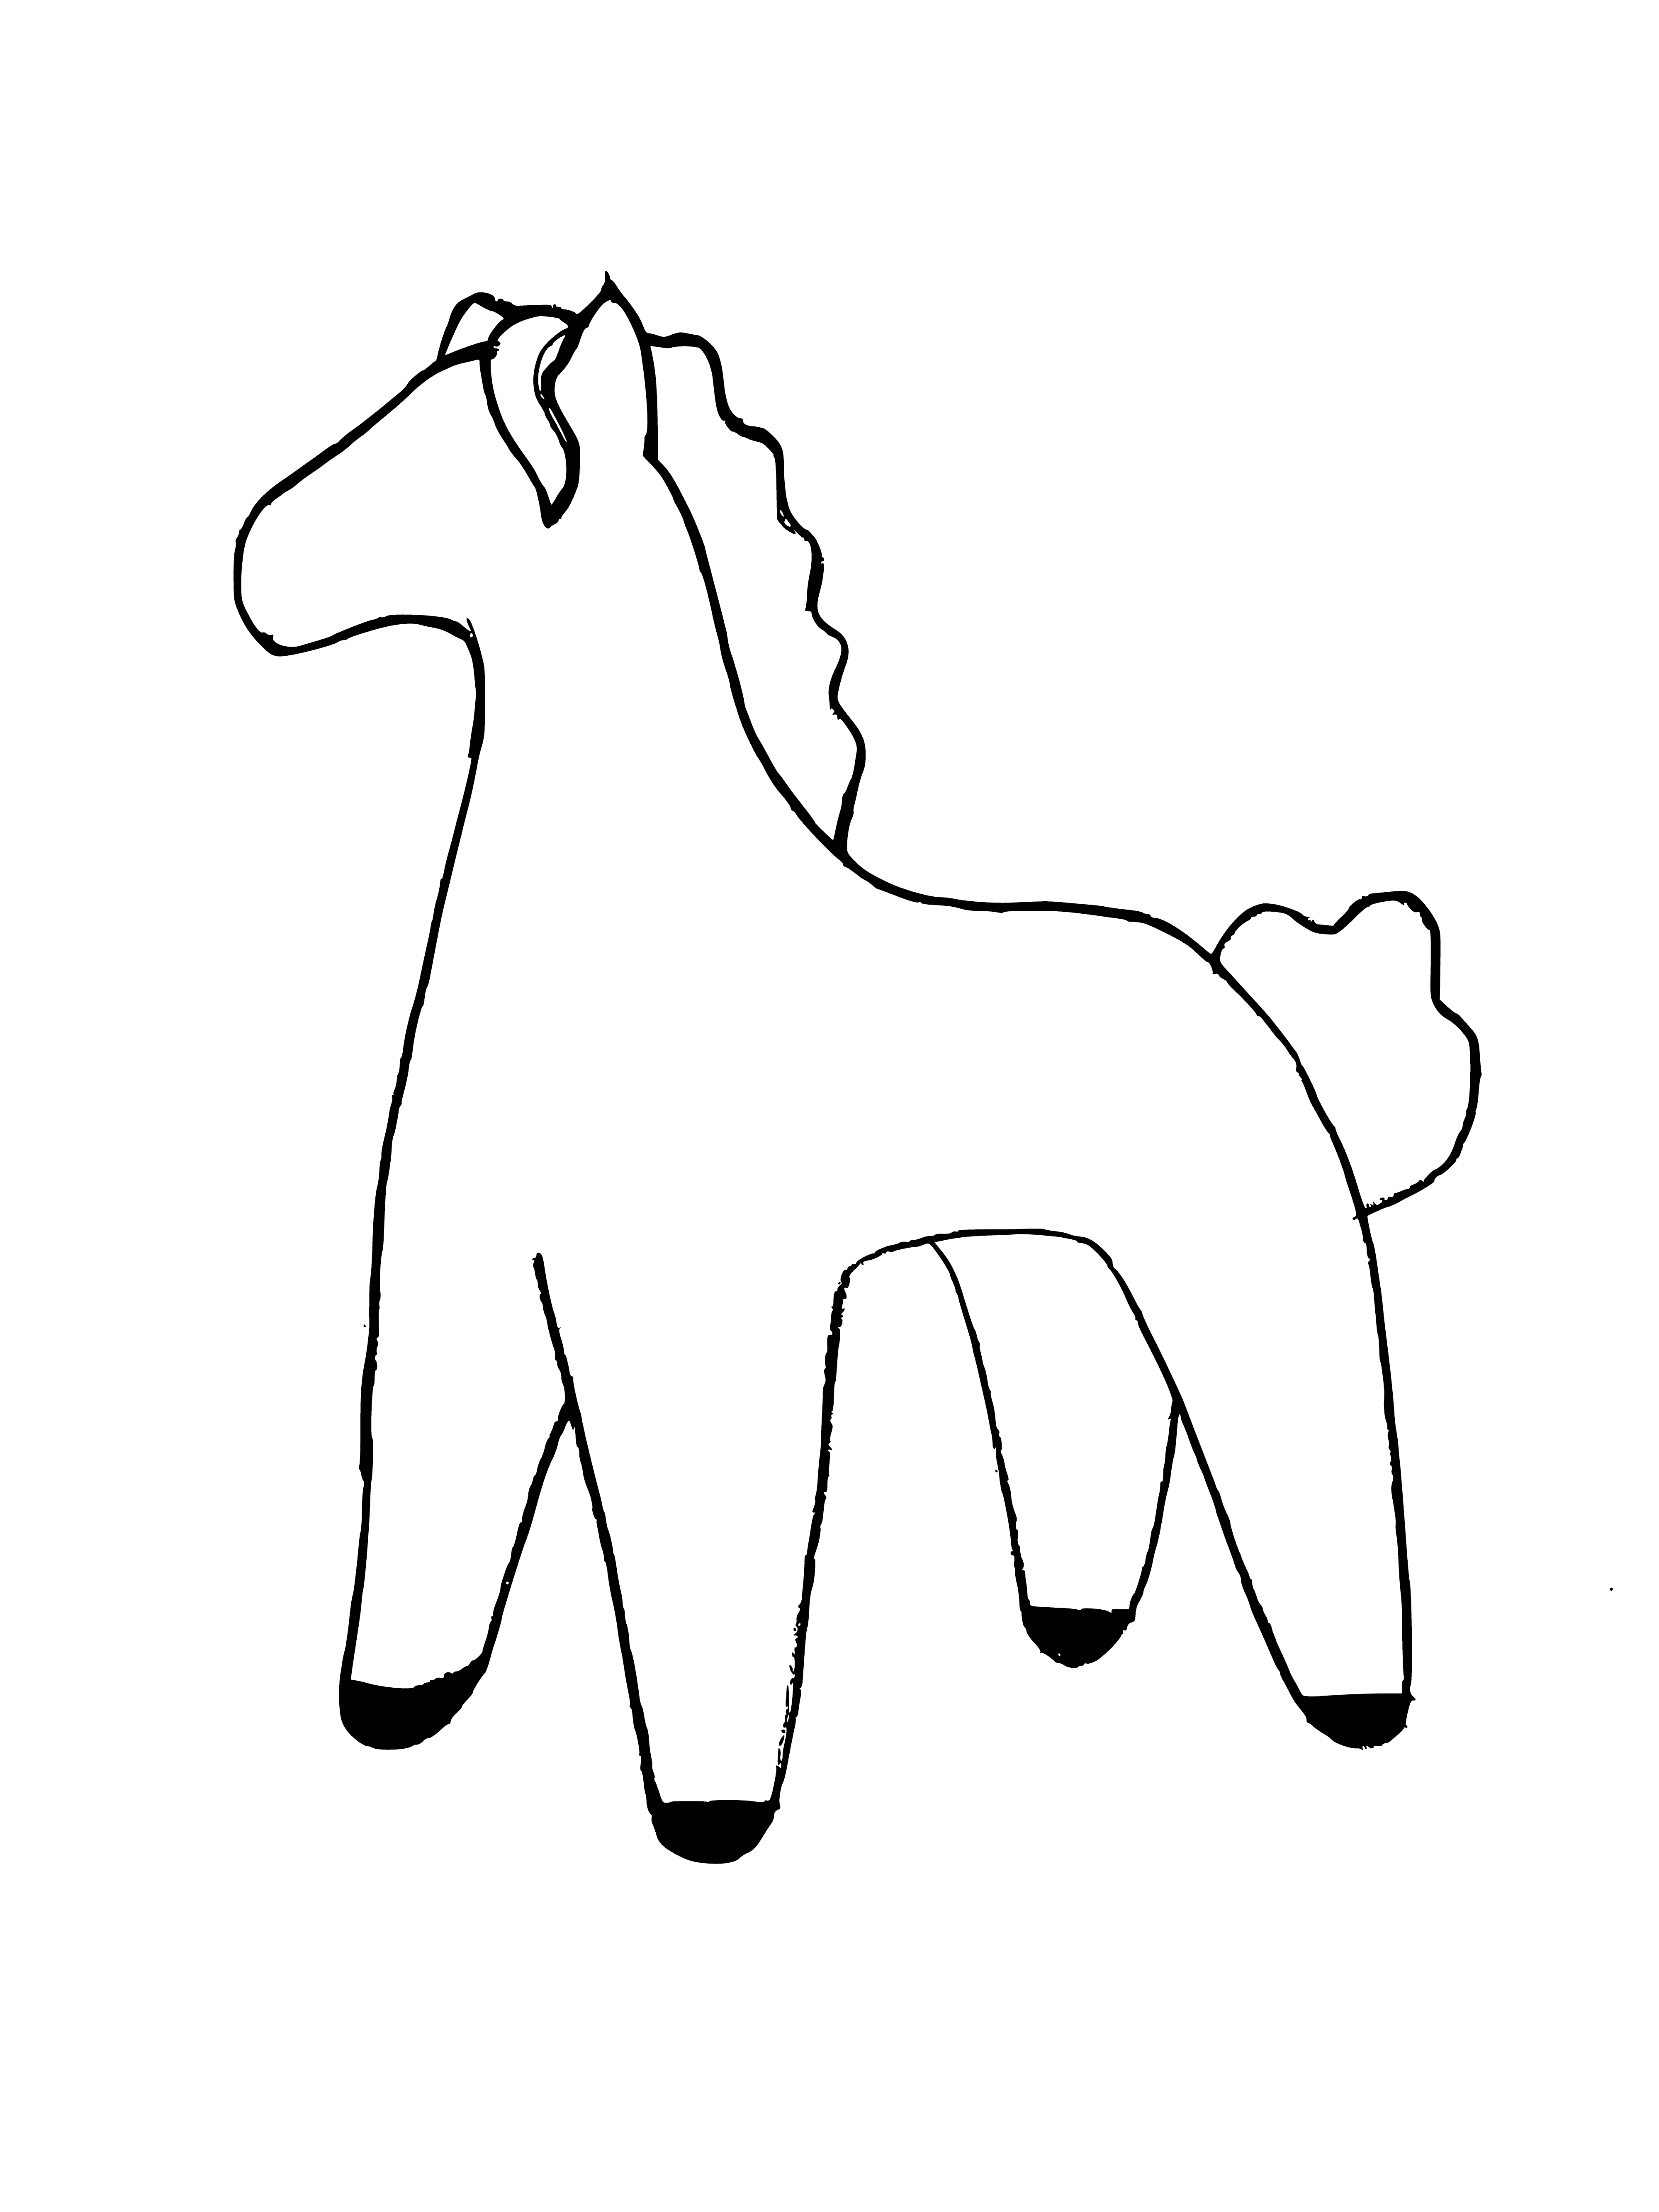 coloring page: Toy horse: brown, white mane/tail, black bridle/saddle.